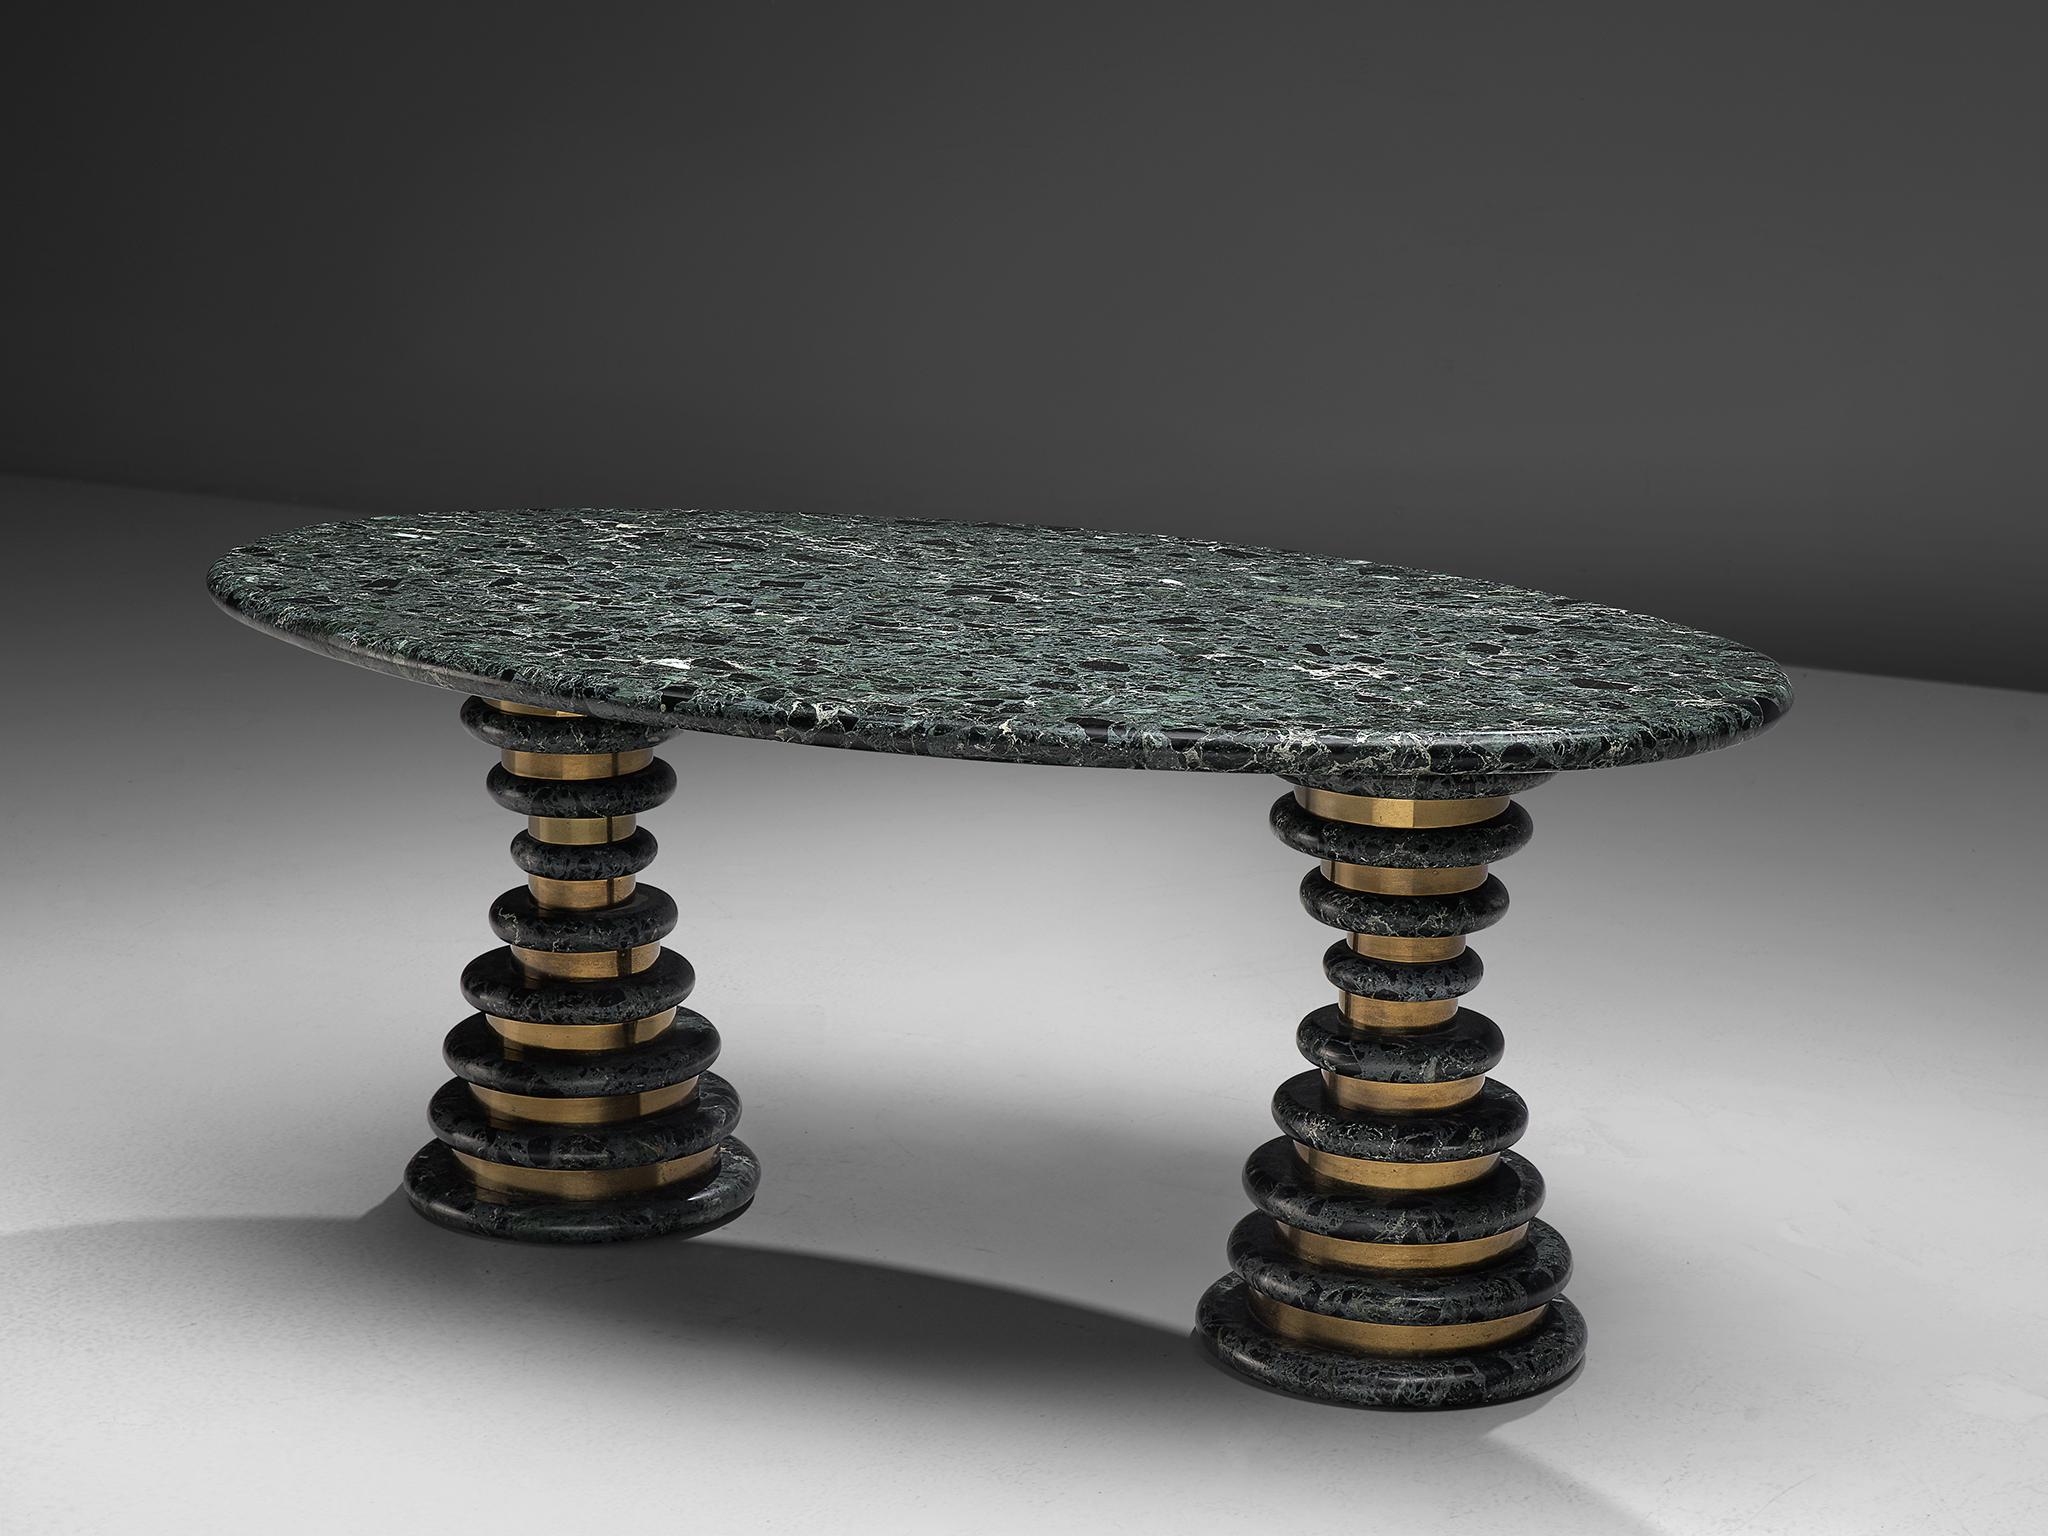 Marzio Cecchi for Studio Most, centre table, in green marble and brass, Italy, 1960s.

Very special green marble table designed by Marzio Cecchi. The design of this table is from the 1960s and haven't been produced at large-scale. This kind of